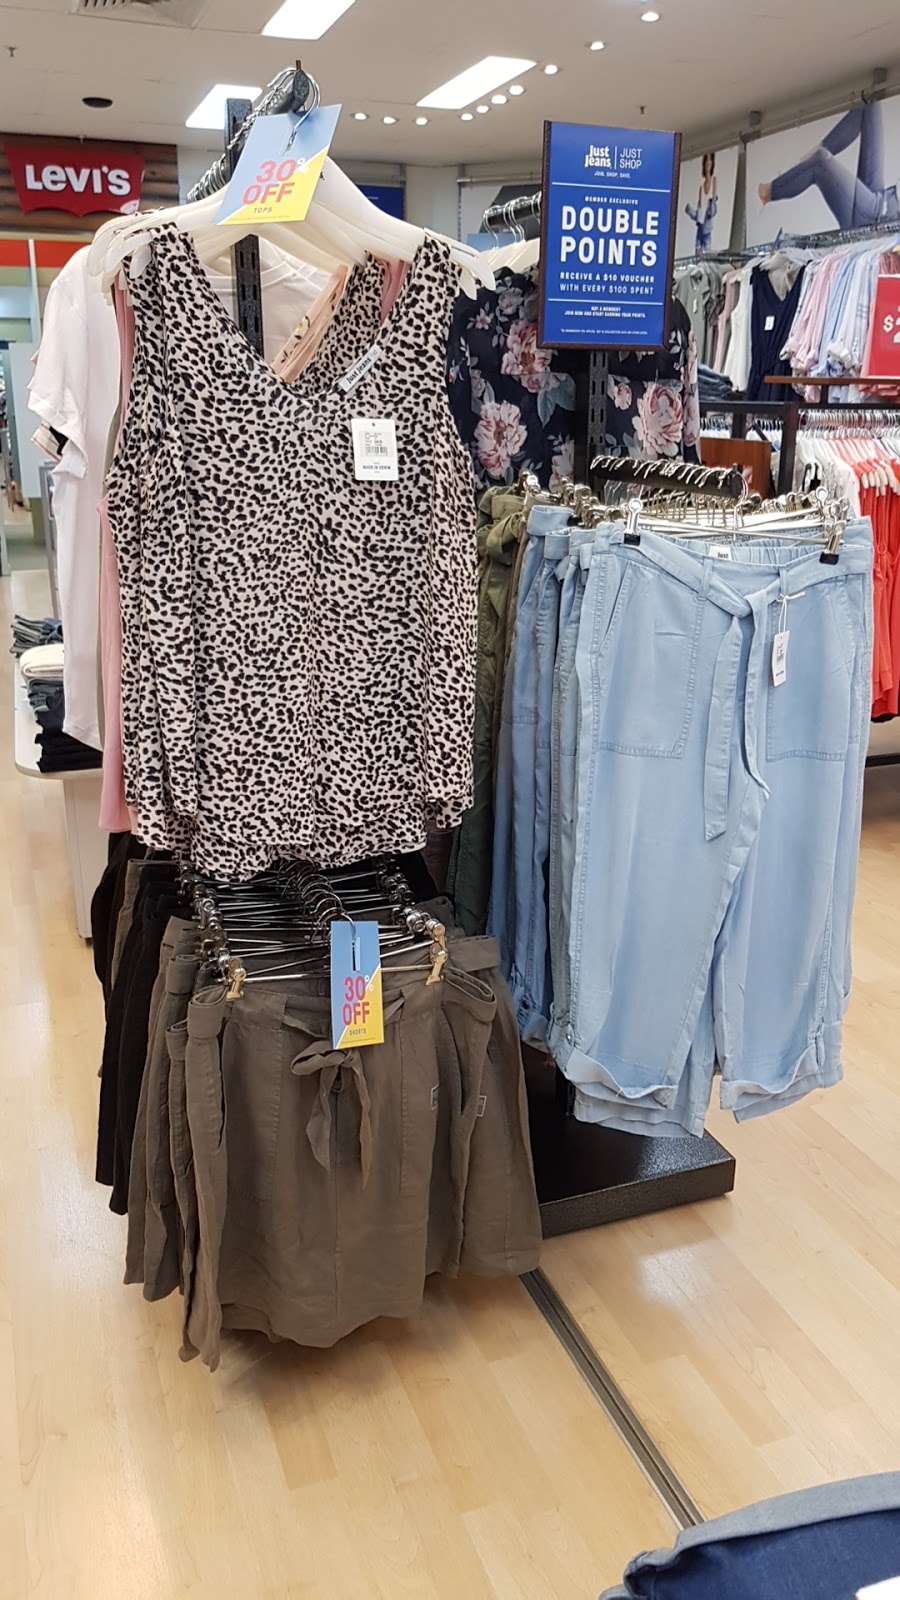 Just Jeans | CENTRO S/C, 38/6 Central Ave, Urraween QLD 4655, Australia | Phone: (07) 4124 5974